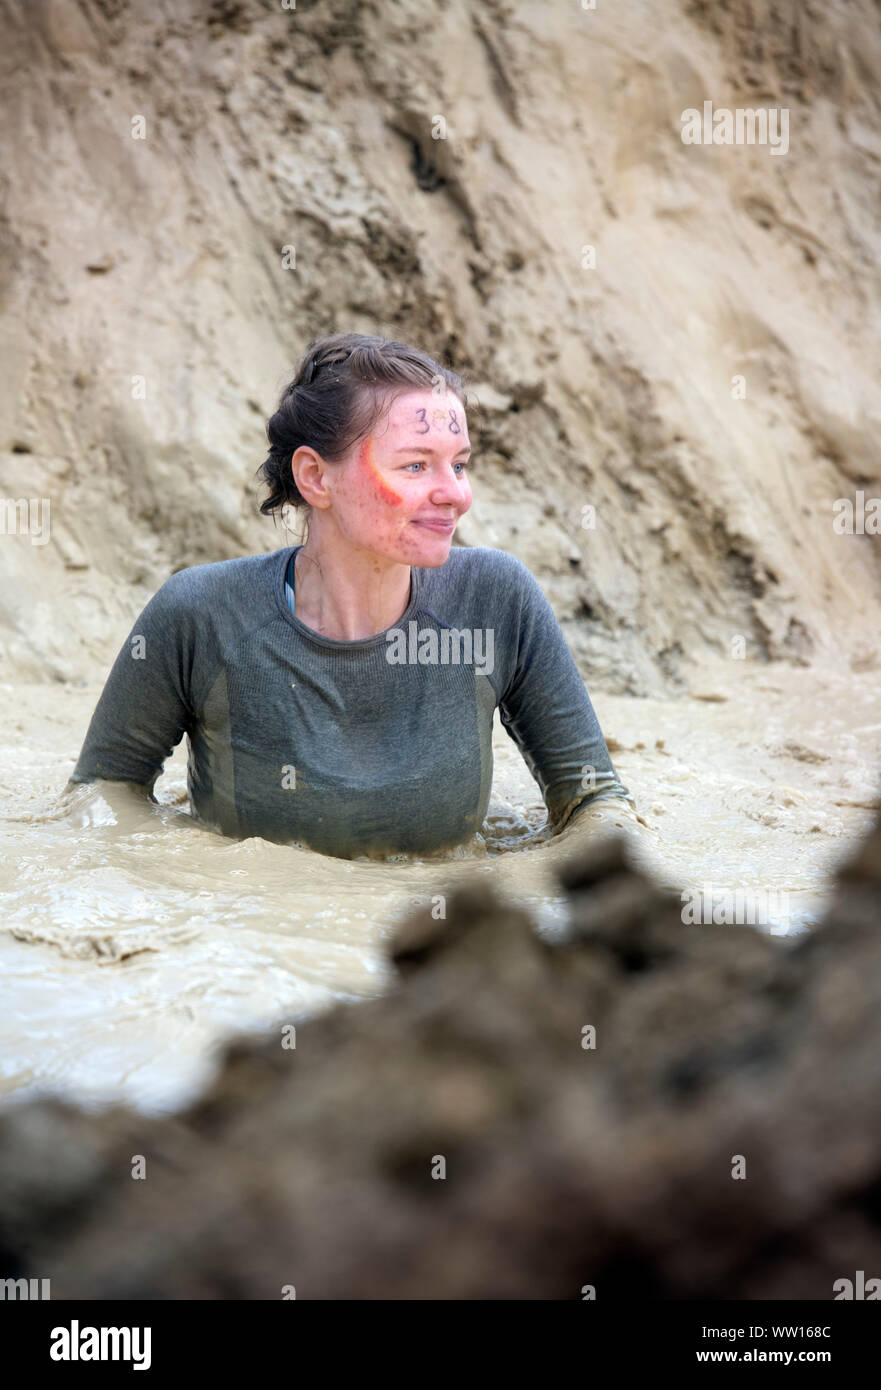 A contestant on the ‘Mud Mile’ at the Tough Mudder endurance event in Badminton Park, Gloucestershire UK Stock Photo